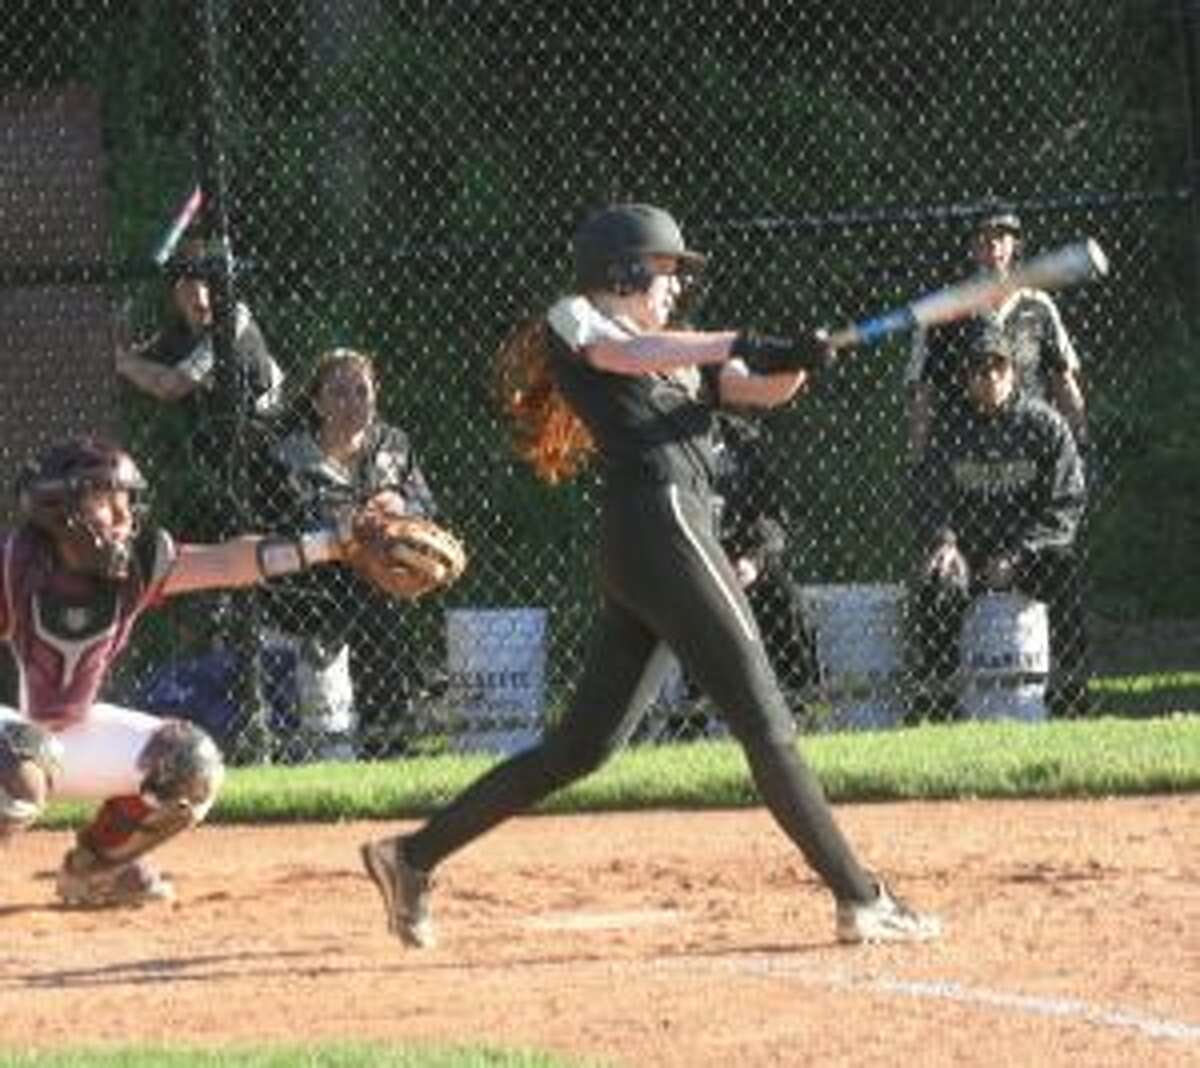 Taylor Brown was one of three Trumbull High seniors who knocked in runs for the Lady Eagles. — Bill Bloxsom photo